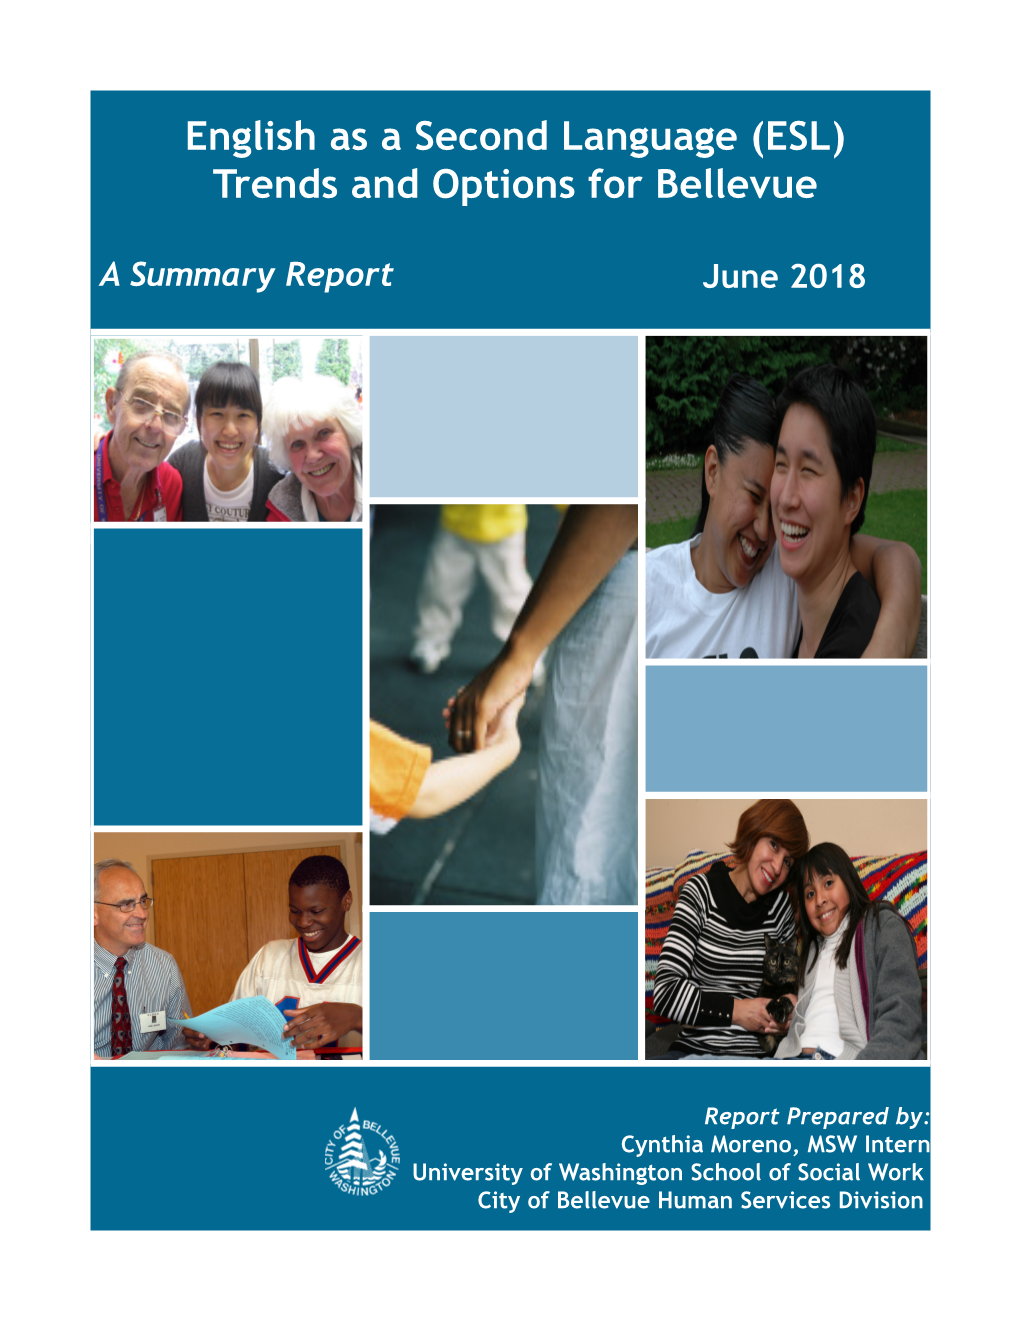 English As a Second Language (ESL) Trends and Options for Bellevue